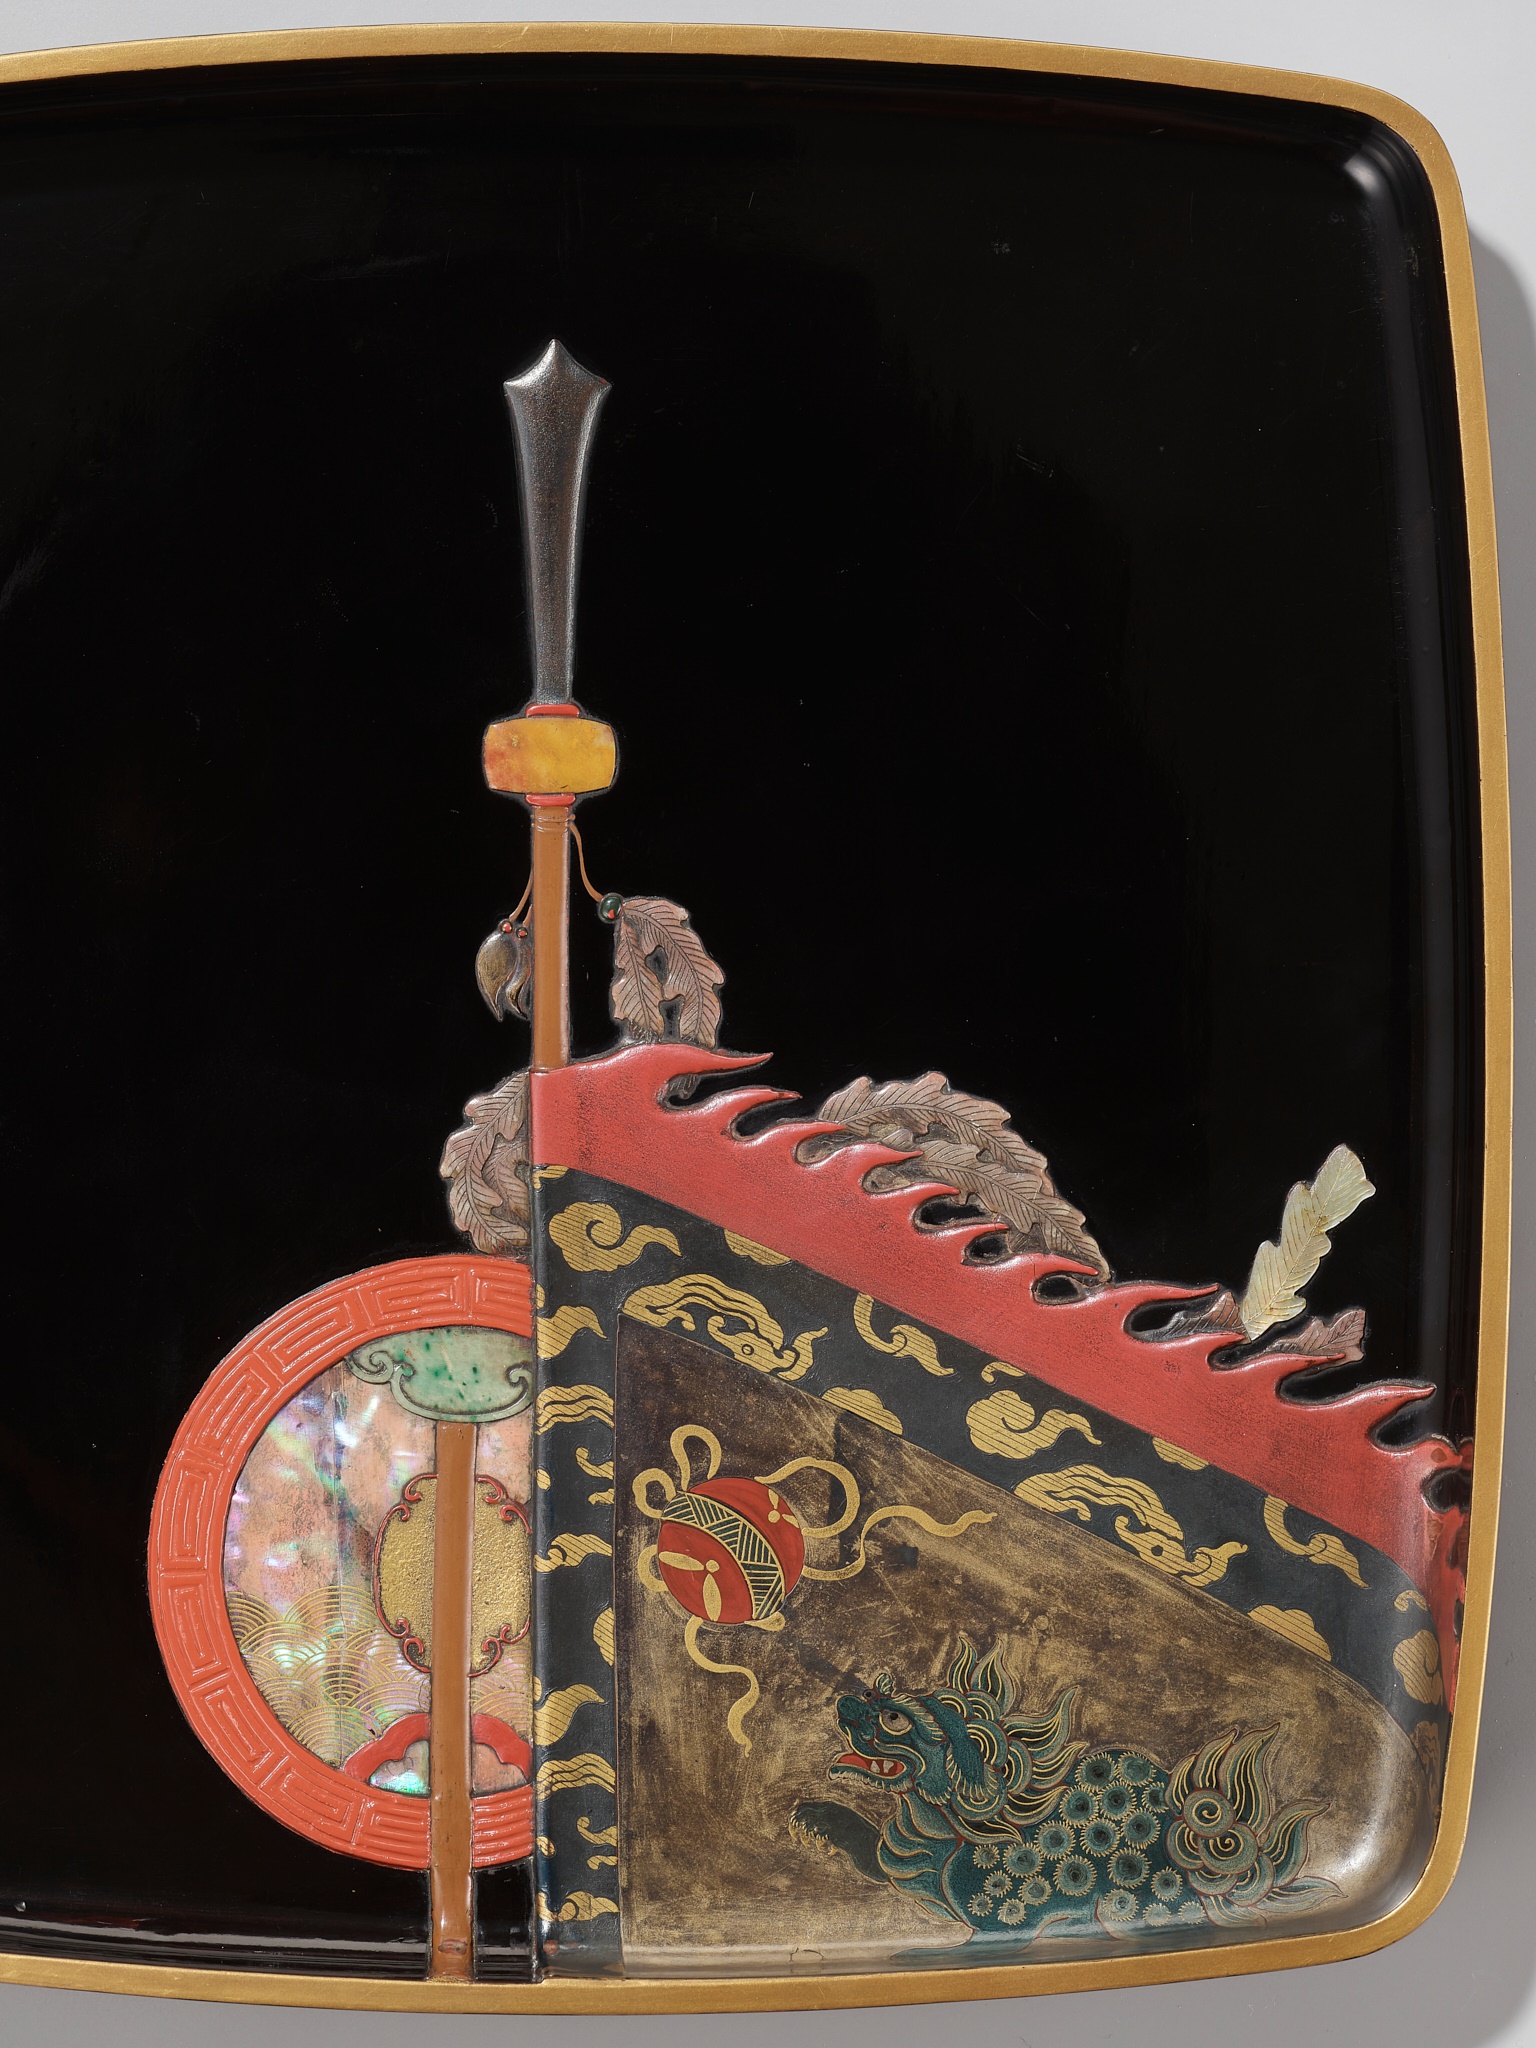 A SUPERB RITSUO-SCHOOL LACQUER AND CERAMIC-INLAID SUZURIBAKO DEPICTING AN ELEPHANT - Image 7 of 9